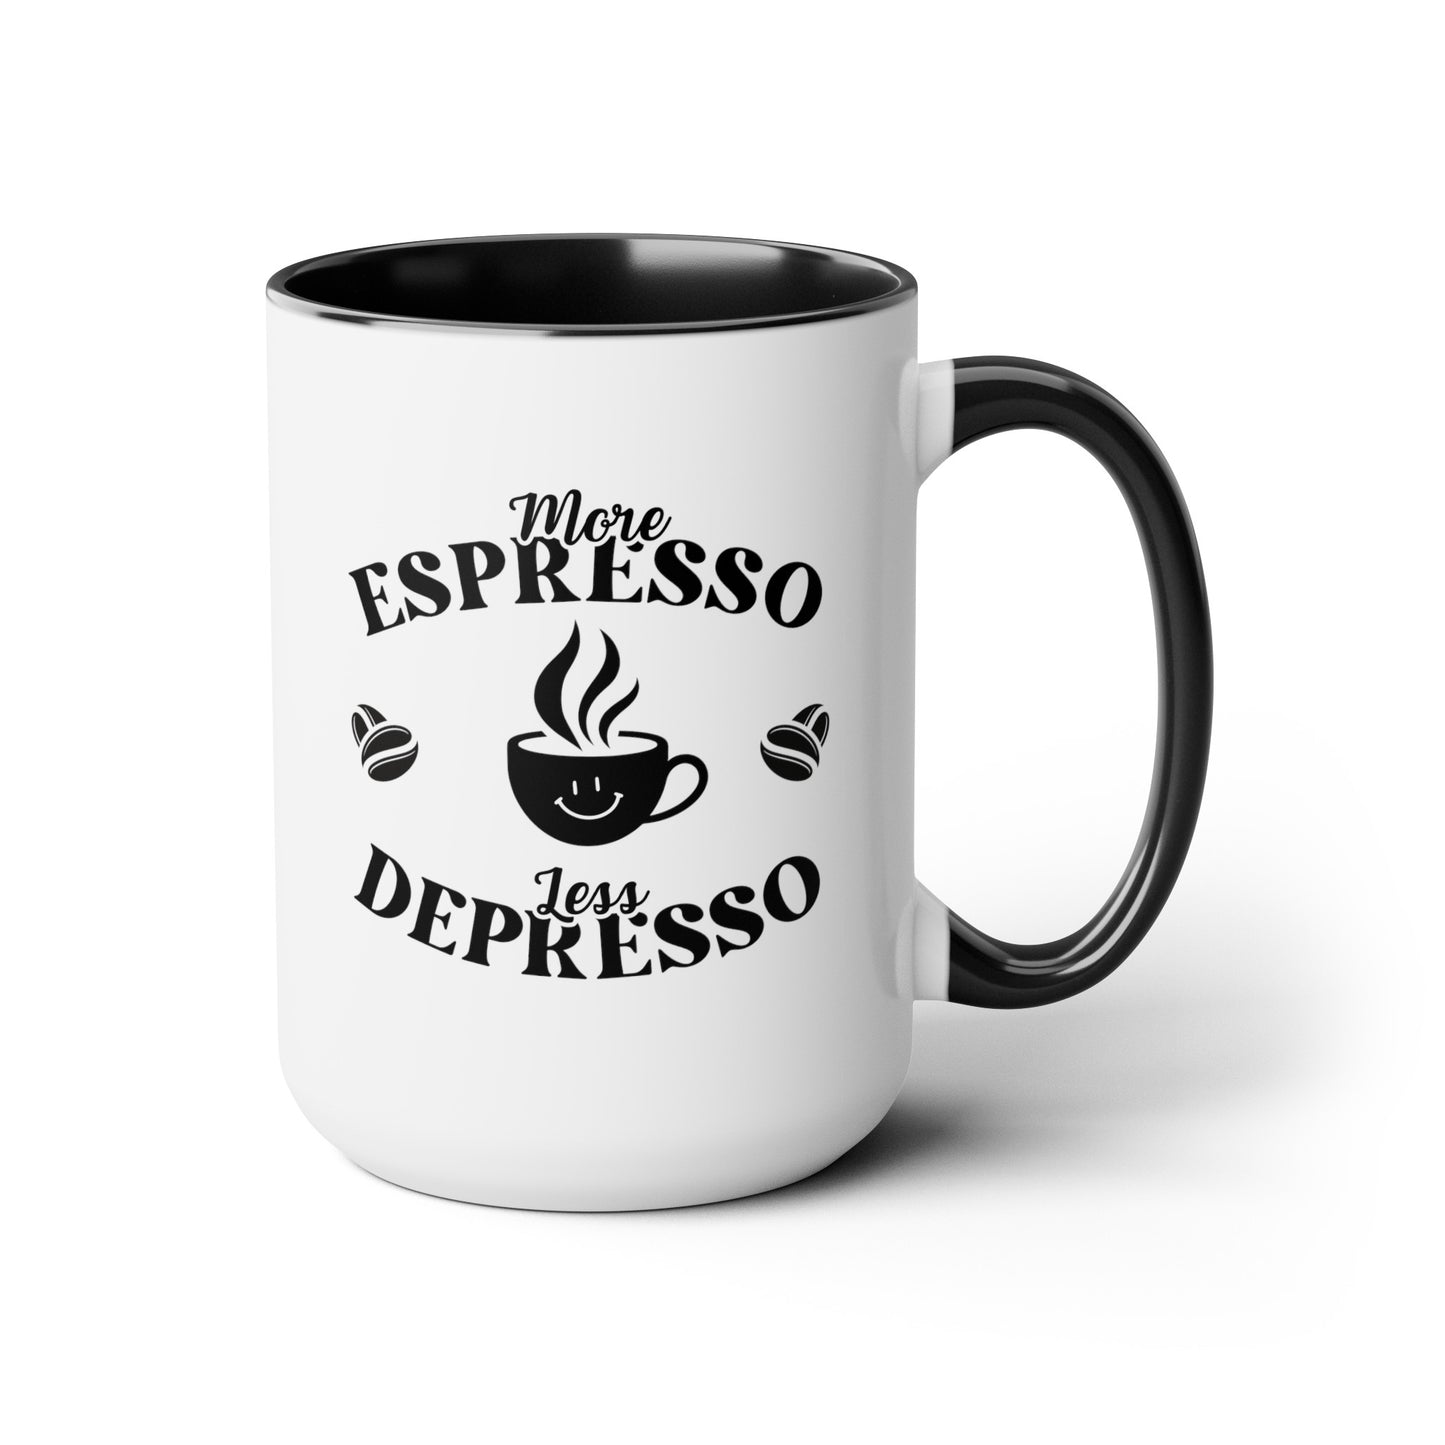 More Espresso Less Depresso 15oz white with black accent funny large coffee mug gift for caffeine lover sayings quotes retro bartender barista waveywares wavey wares wavywares wavy wares